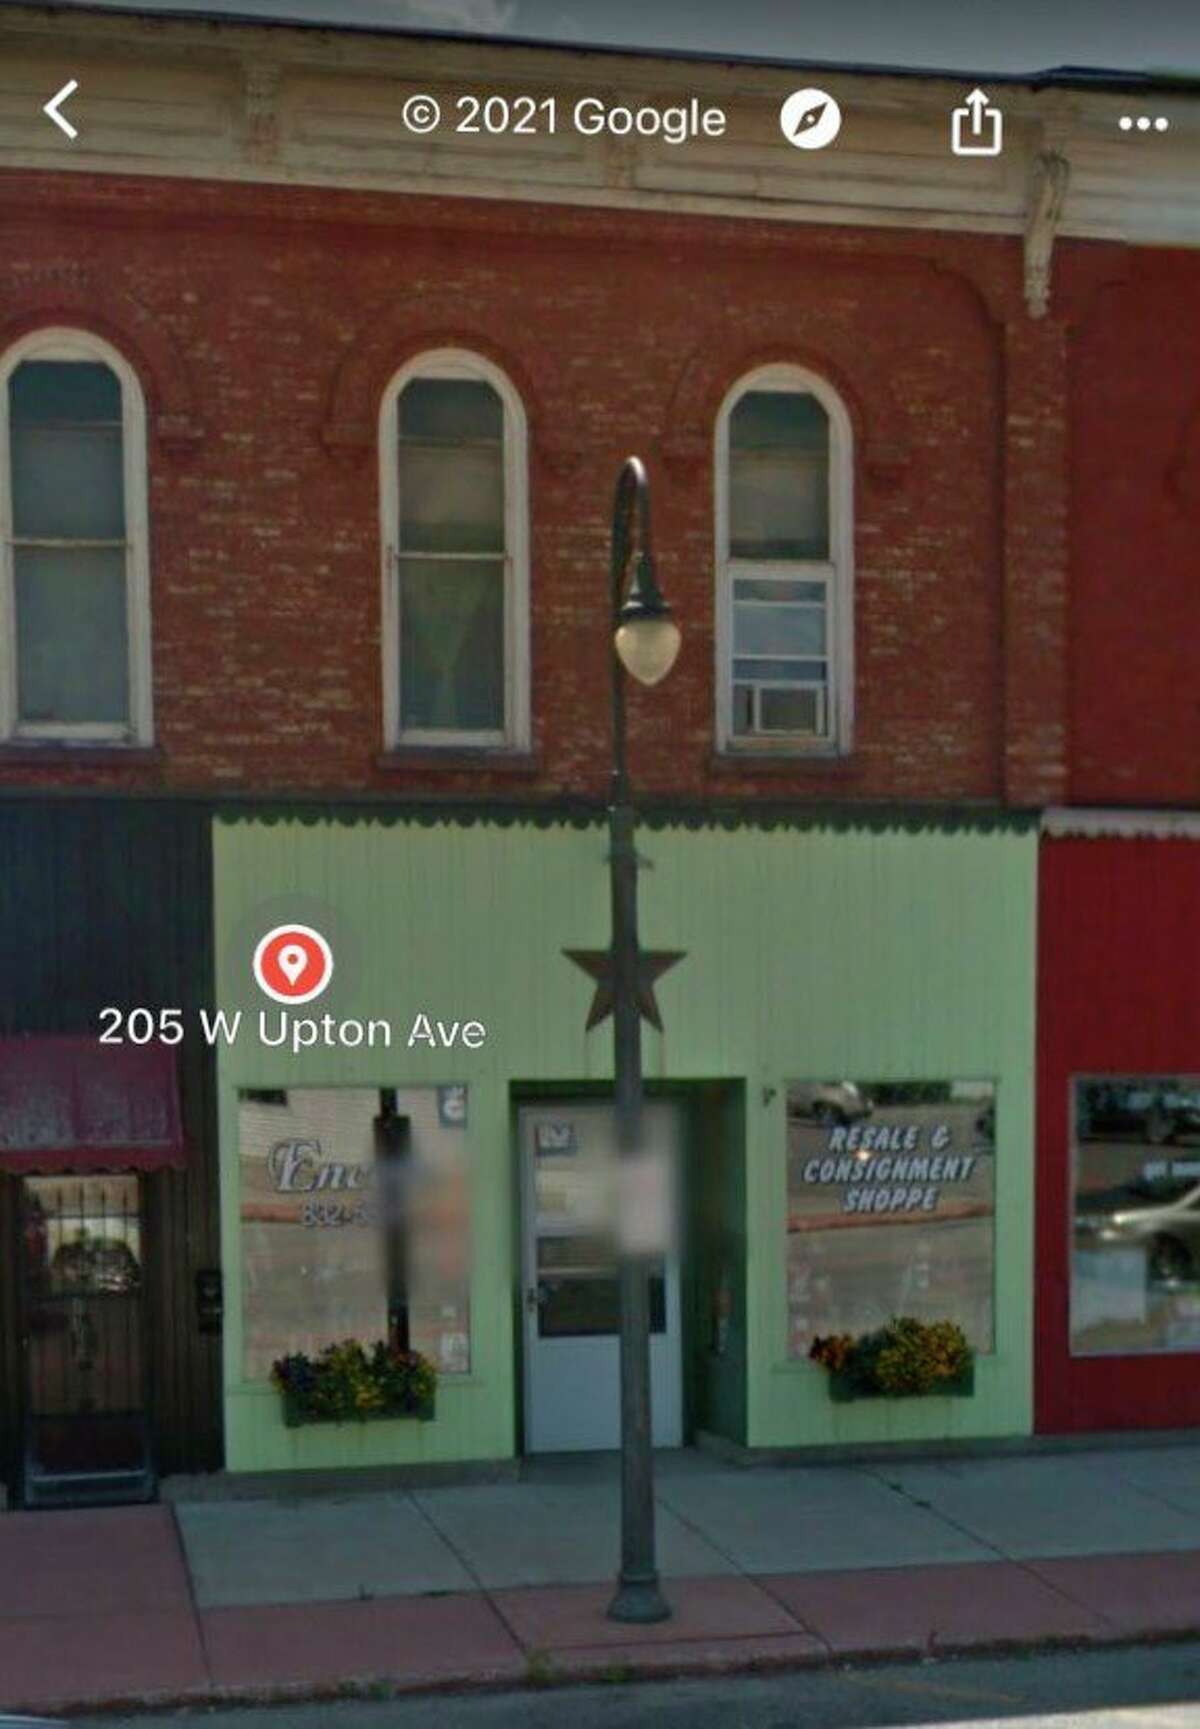 205 W. Upton Ave in Reed City is the new home of New Horizons Humane Society pet food bank and thrift store that will be opening soon. (Photo courtesy of Google Maps)